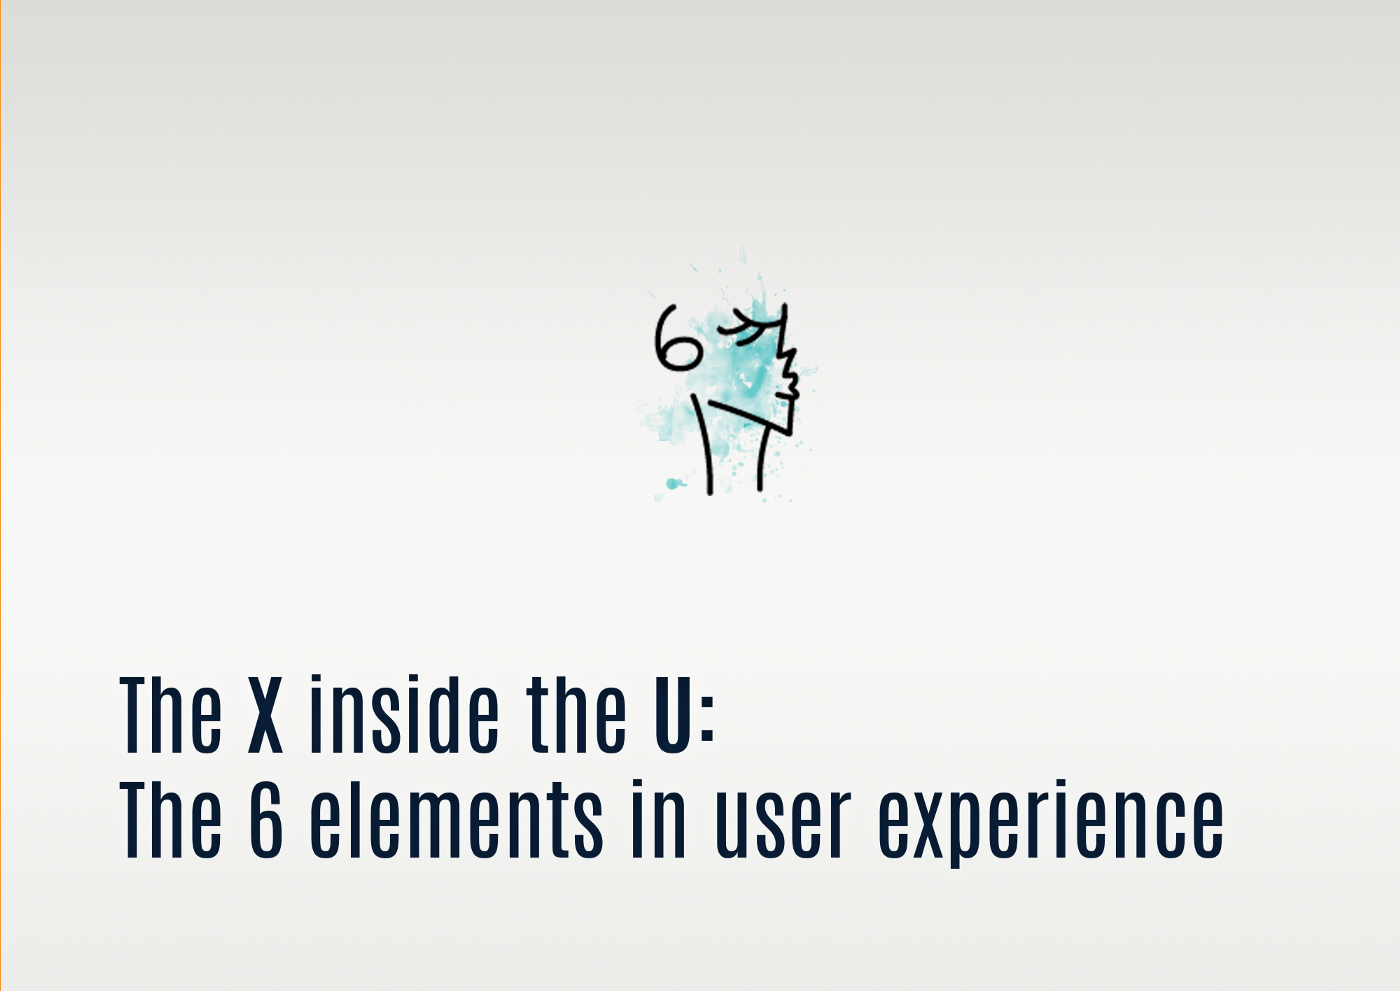 The 6 elements in user experience